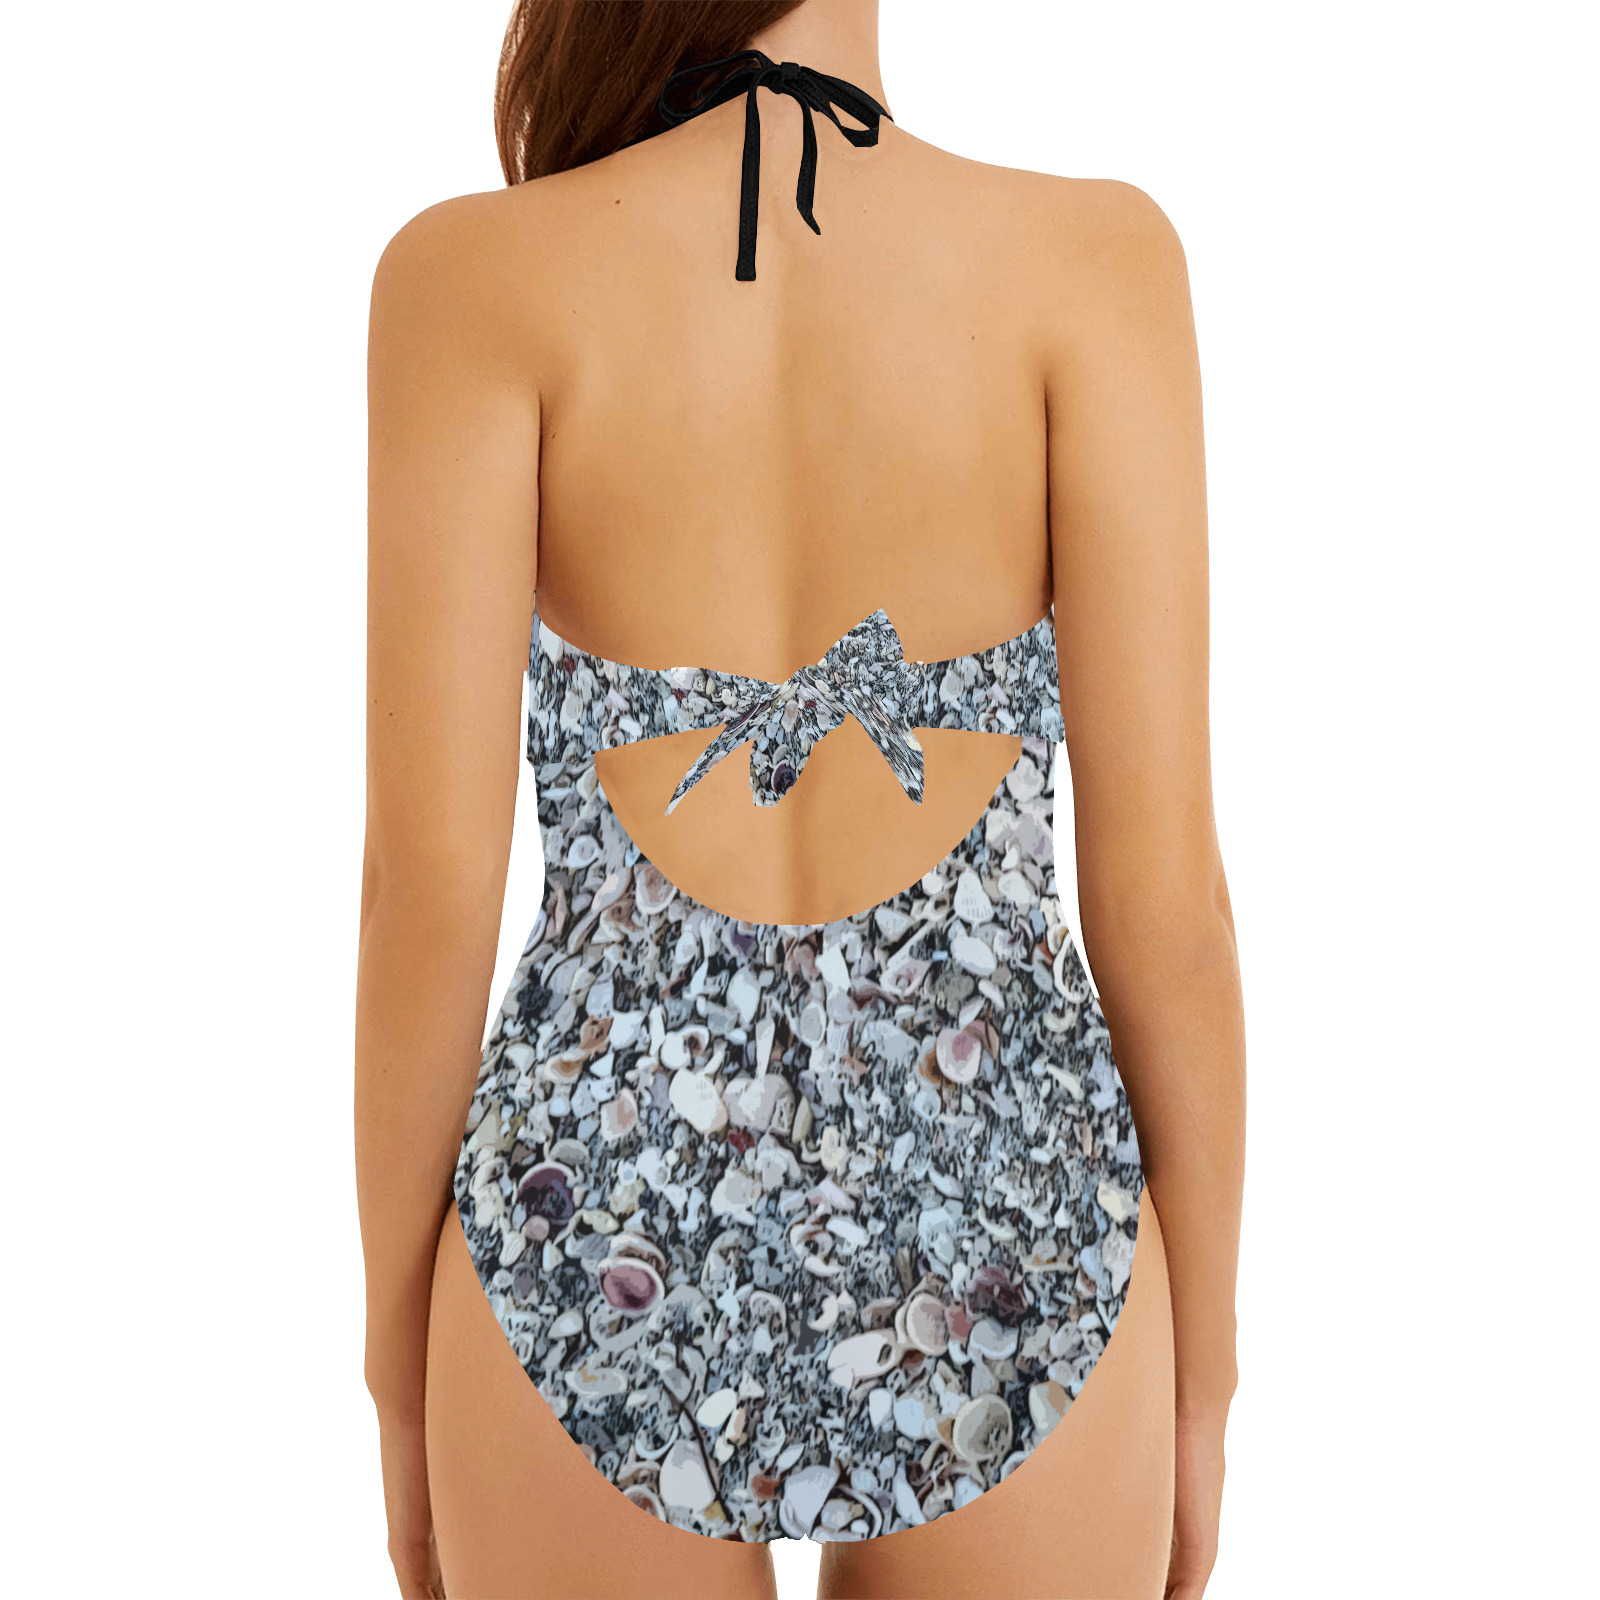 Shells On The Beach 7294 Backless Hollow Out Bow Tie Swimsuit (Model S17)